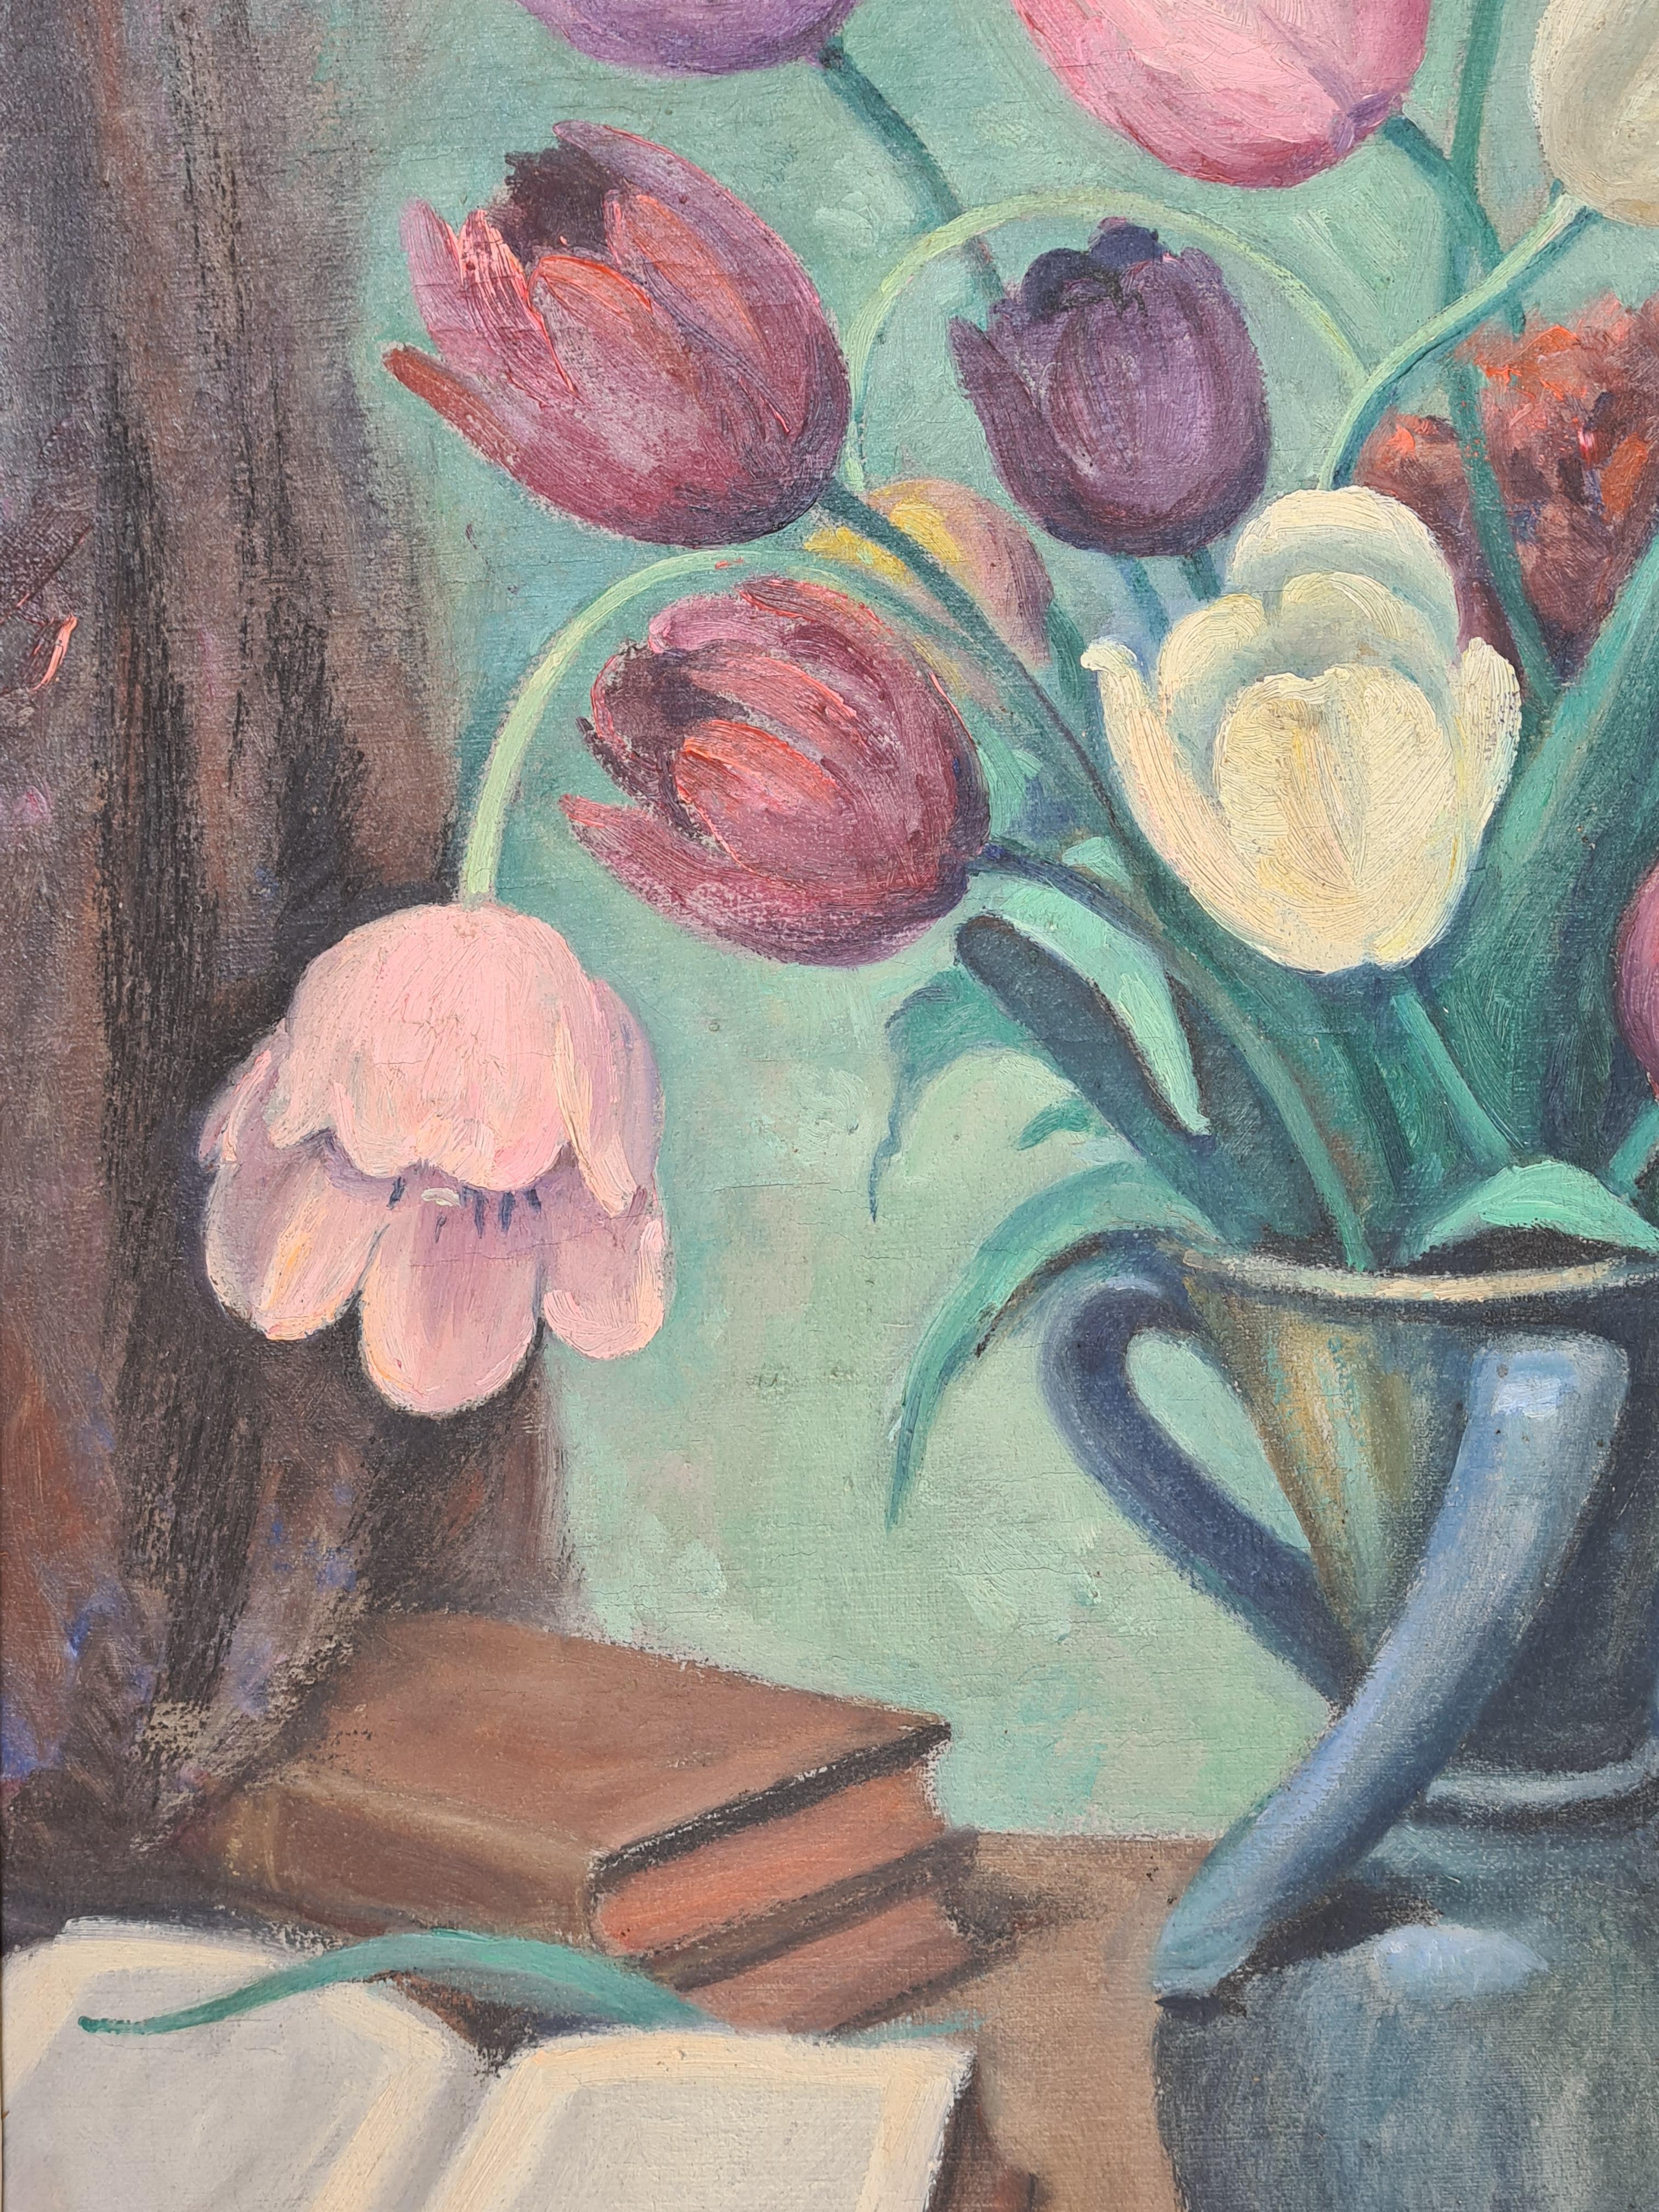 French Art Deco still life of a vase of tulips in an interior by Auguste Mallard. The painting is signed bottom right and presented in a period patinated wood frame.

A colourful and strong painting of an interior view, a table with books and as the